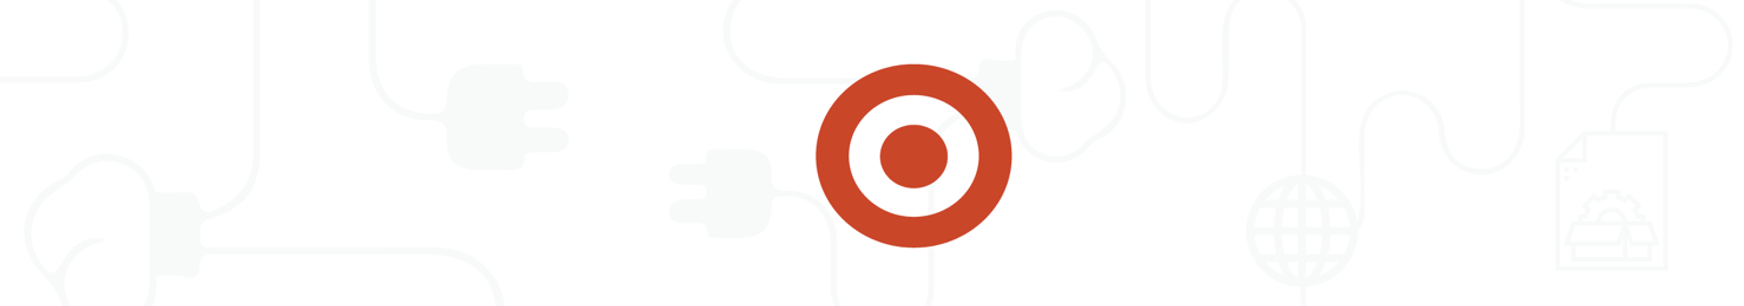 Red Target bullseye logo on a light background with a cloud, plug and globe design.